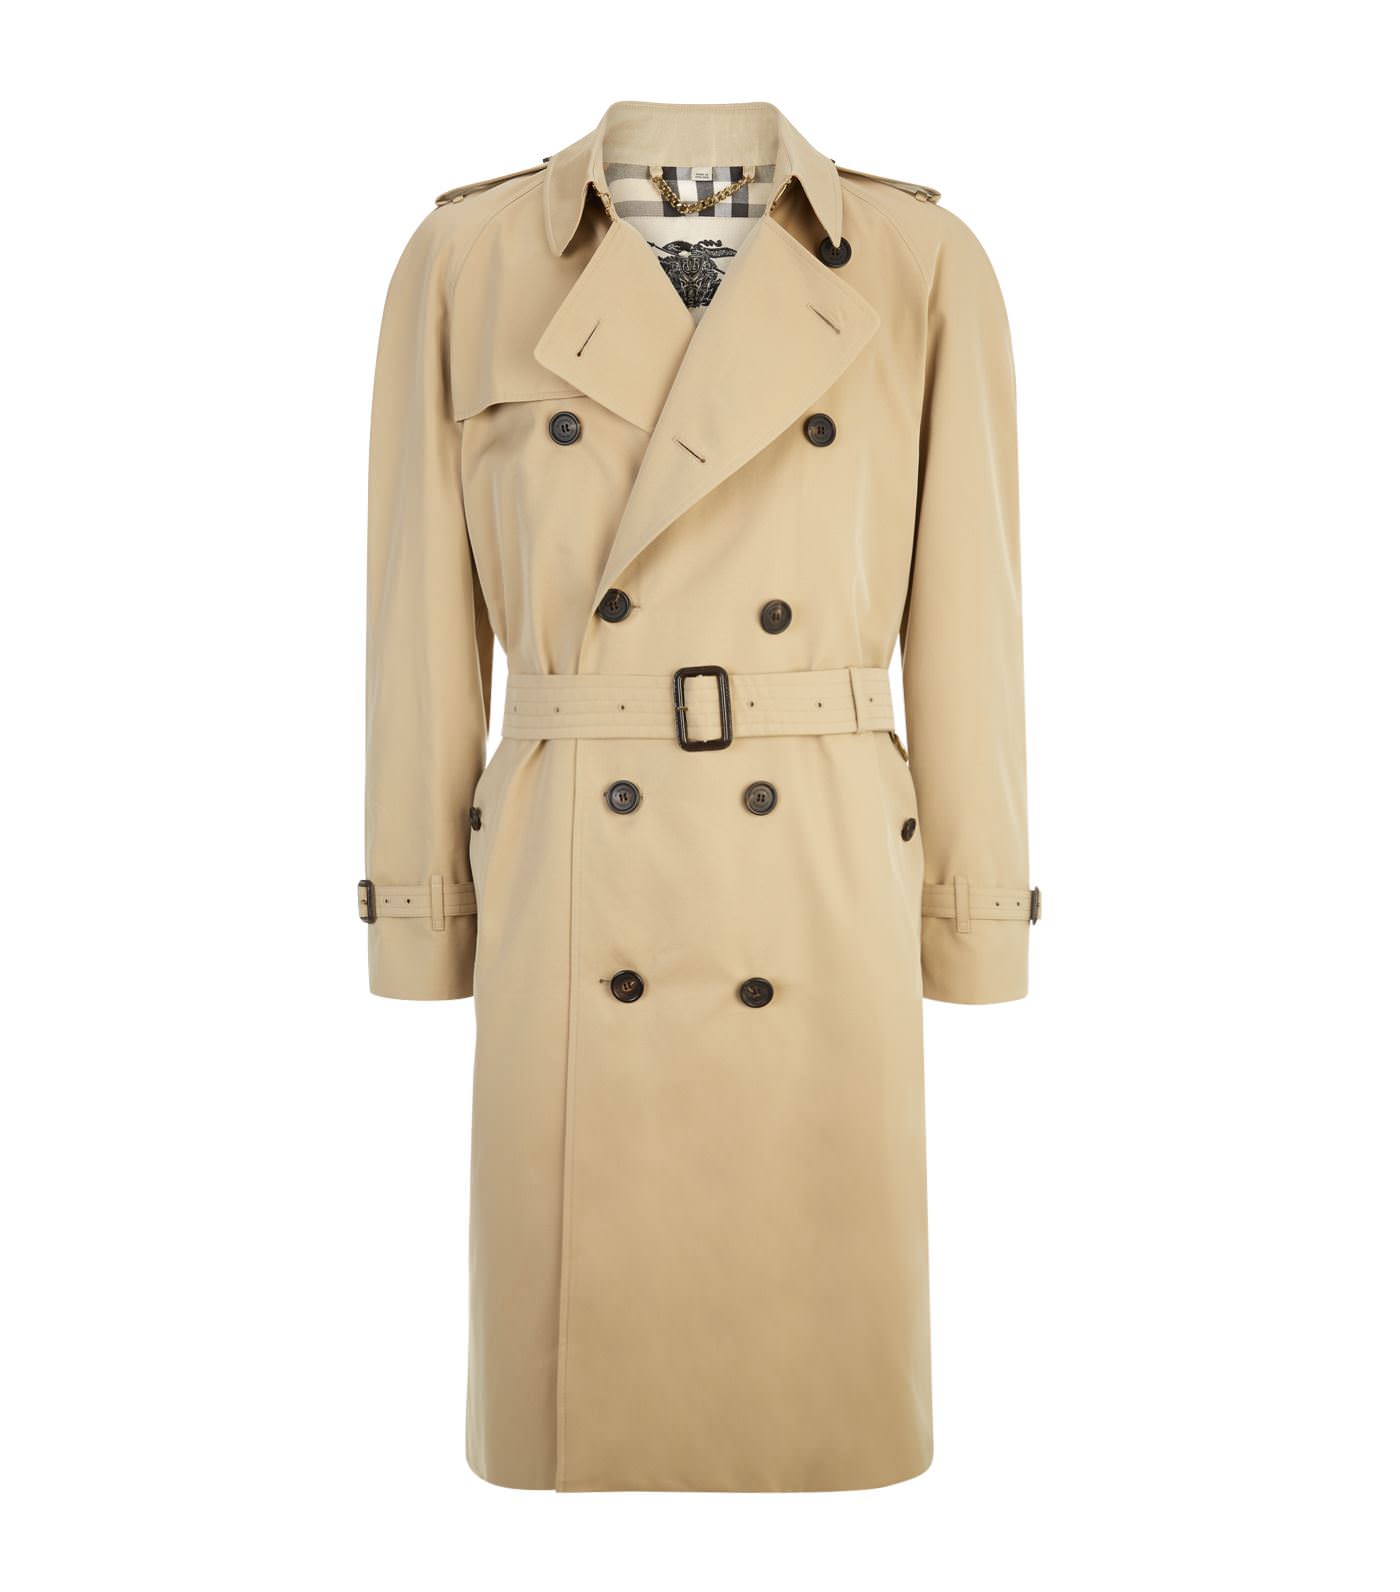 Burberry Trench Coat Made In England Flash Sales, 56% OFF | lagence.tv